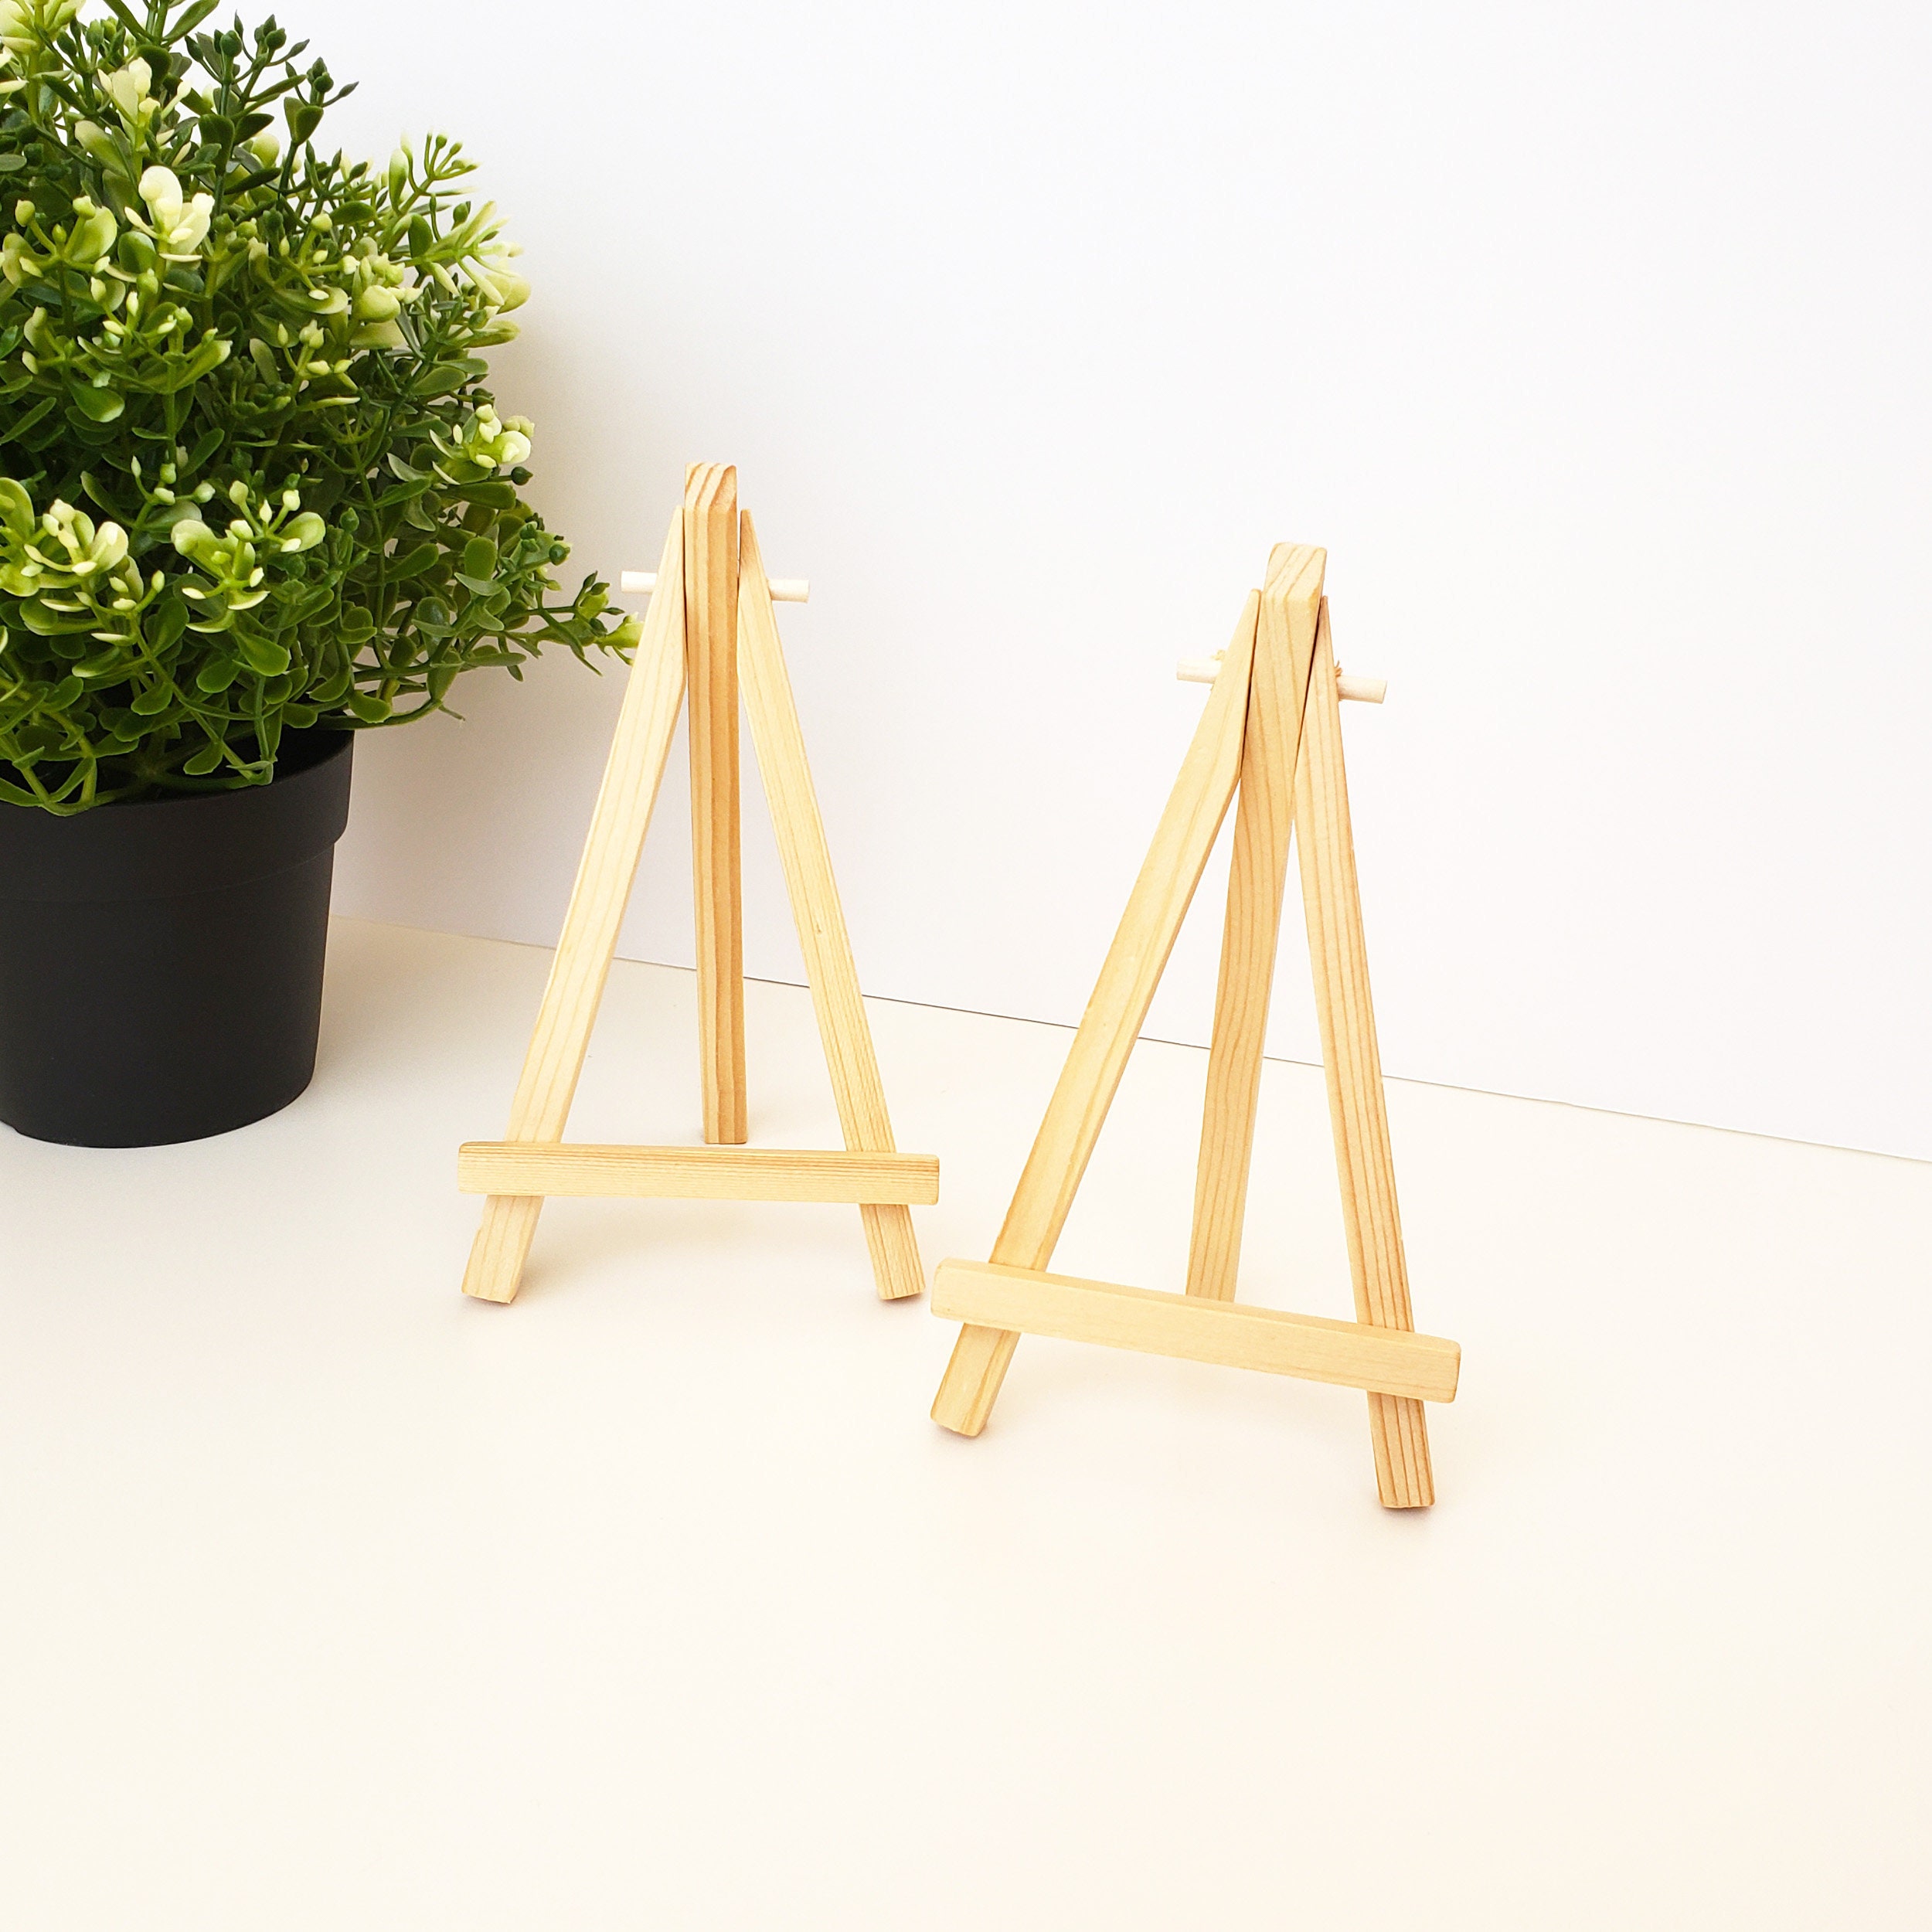 Wooden Easel Stand, Mini Wooden Easel, 6 Inch Easel, Tripod